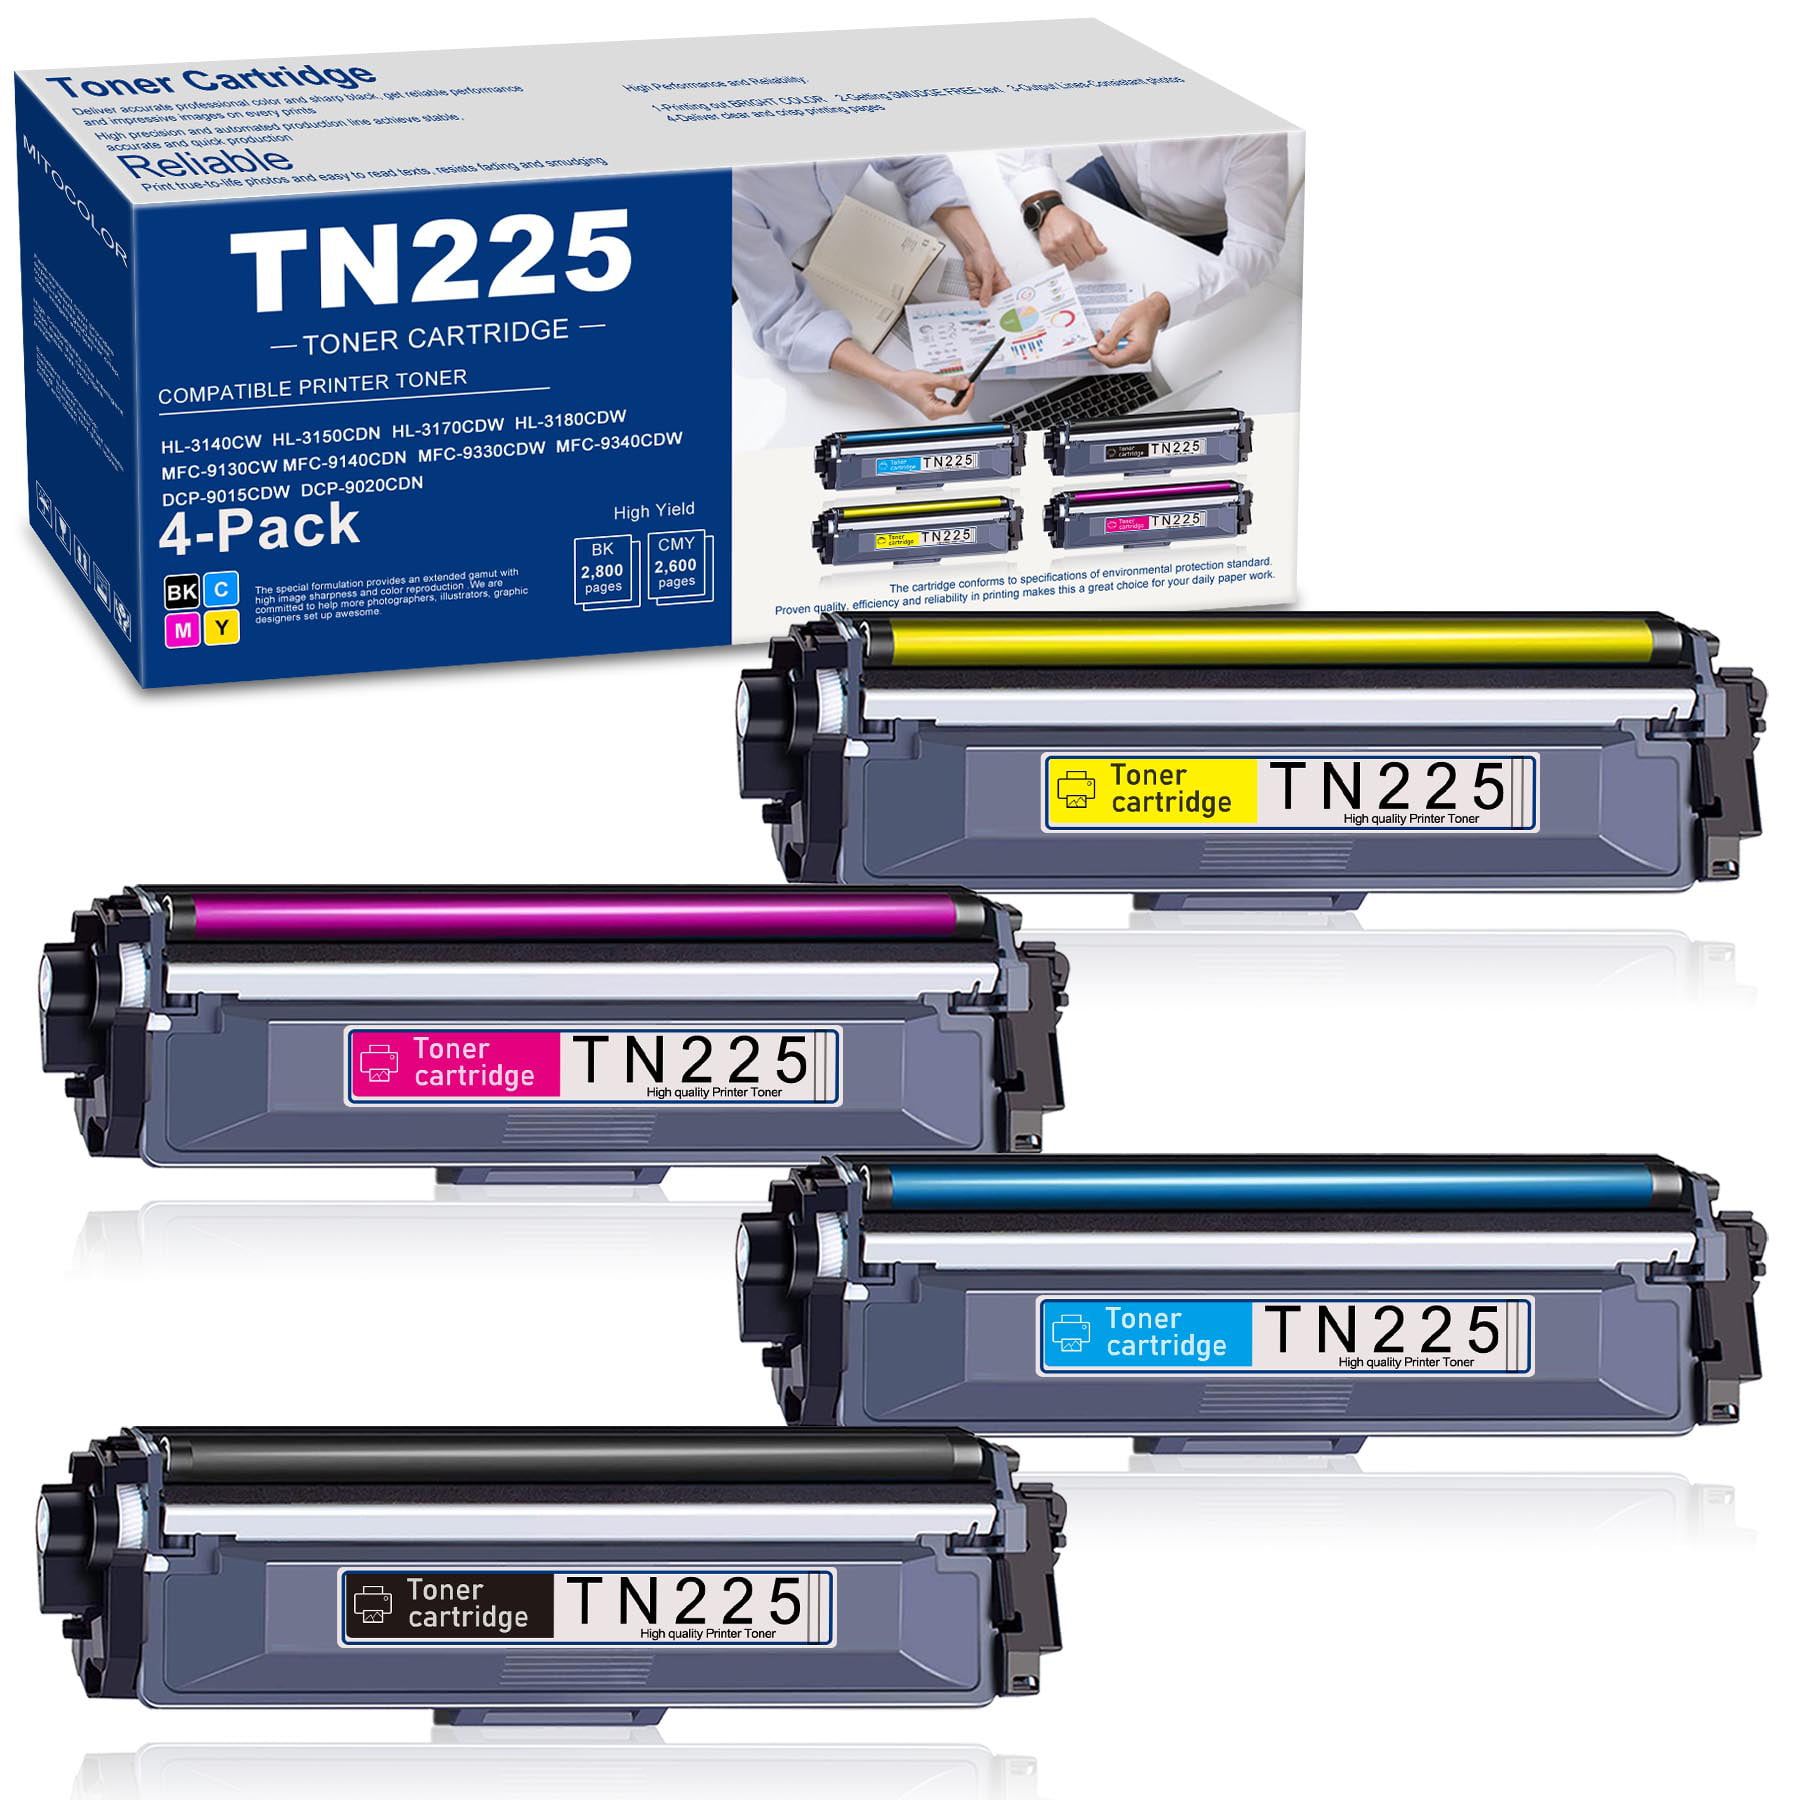 TN225 Compatible TN 225 Replacement for Brother TN225 HL-3150CW HL-3140CW HL-3170CDW HL-3180CDW MFC-9130CW MFC-9330CDW MFC-9340CDW Black Cyan Magenta Yellow 4 Pack High Yield TN-225 -